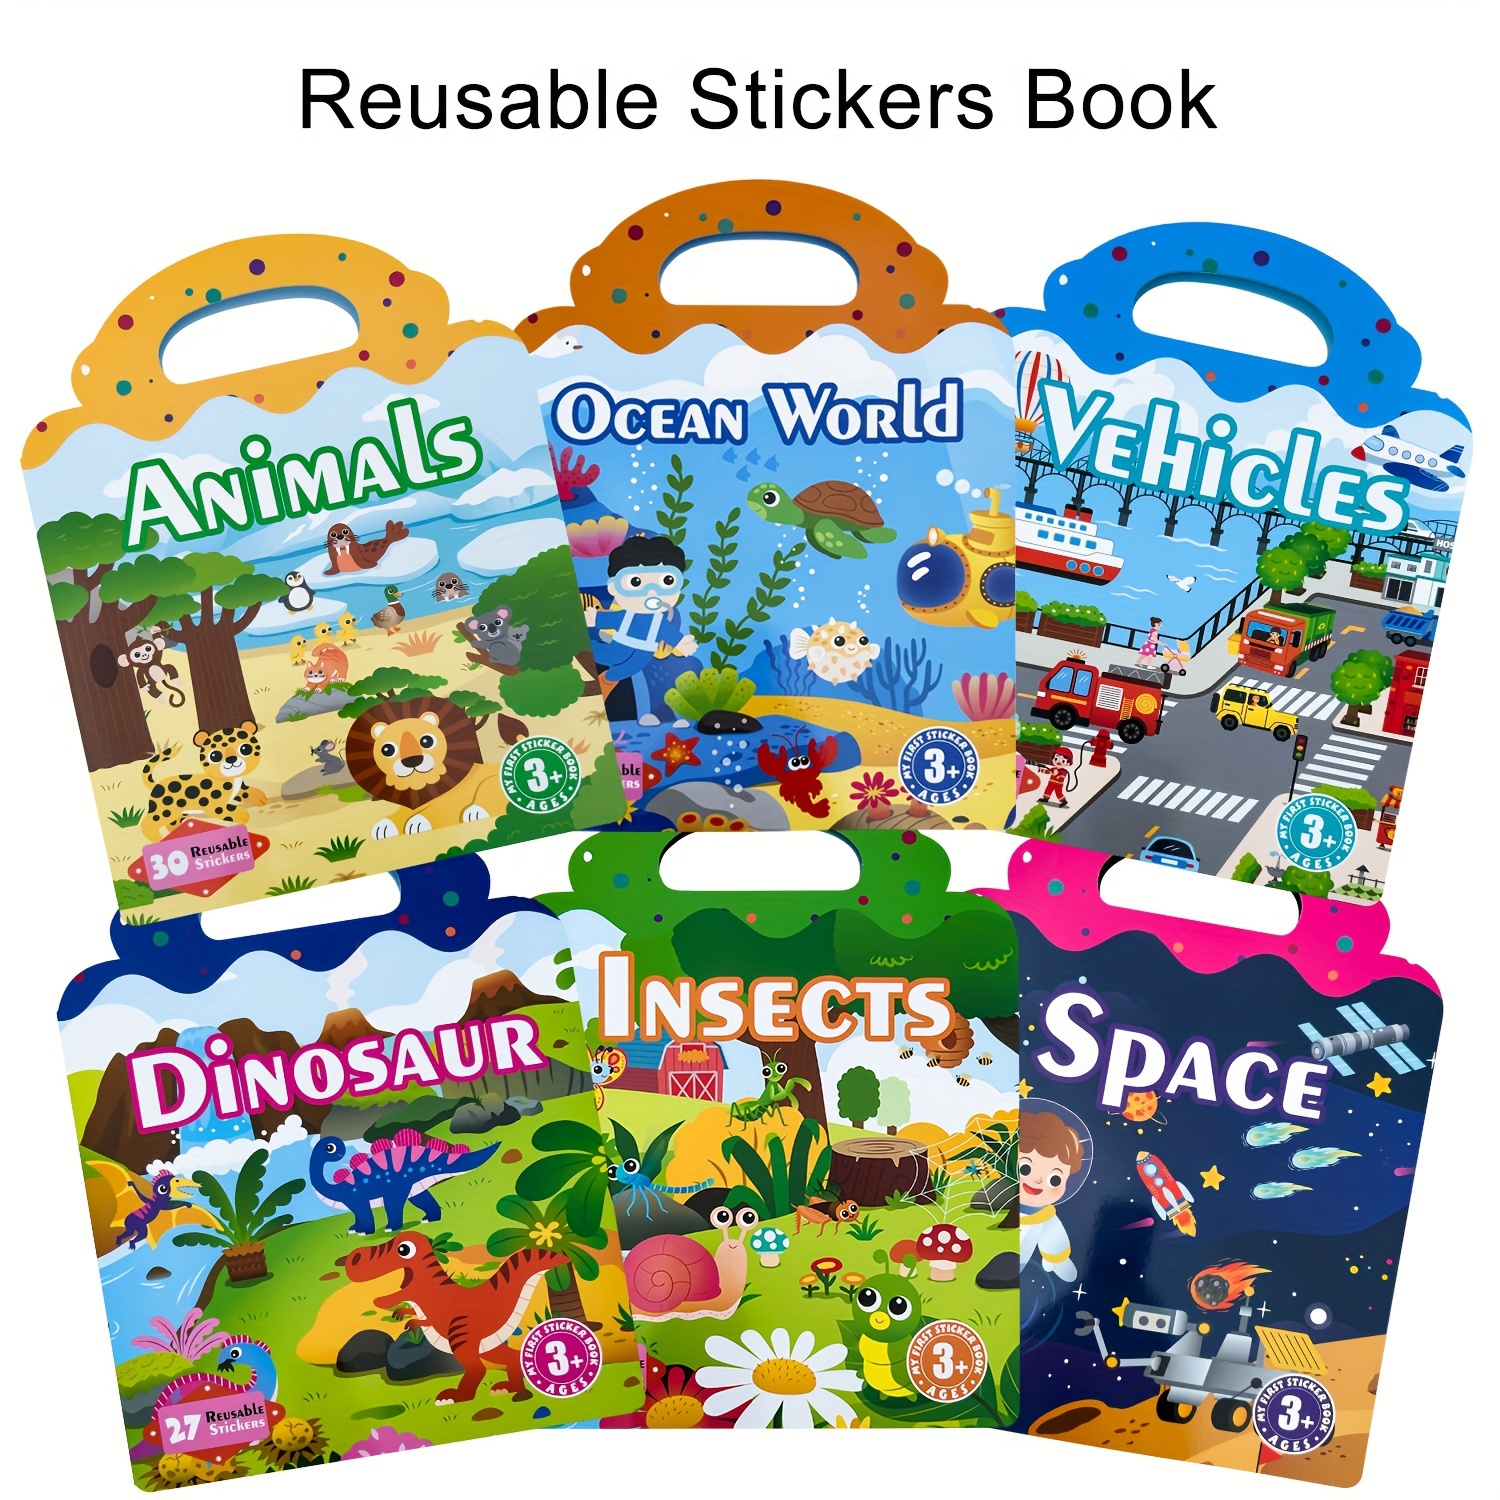 Reusable Sticker Book for Kids (Farm, Ocean Animals, Insects, Body